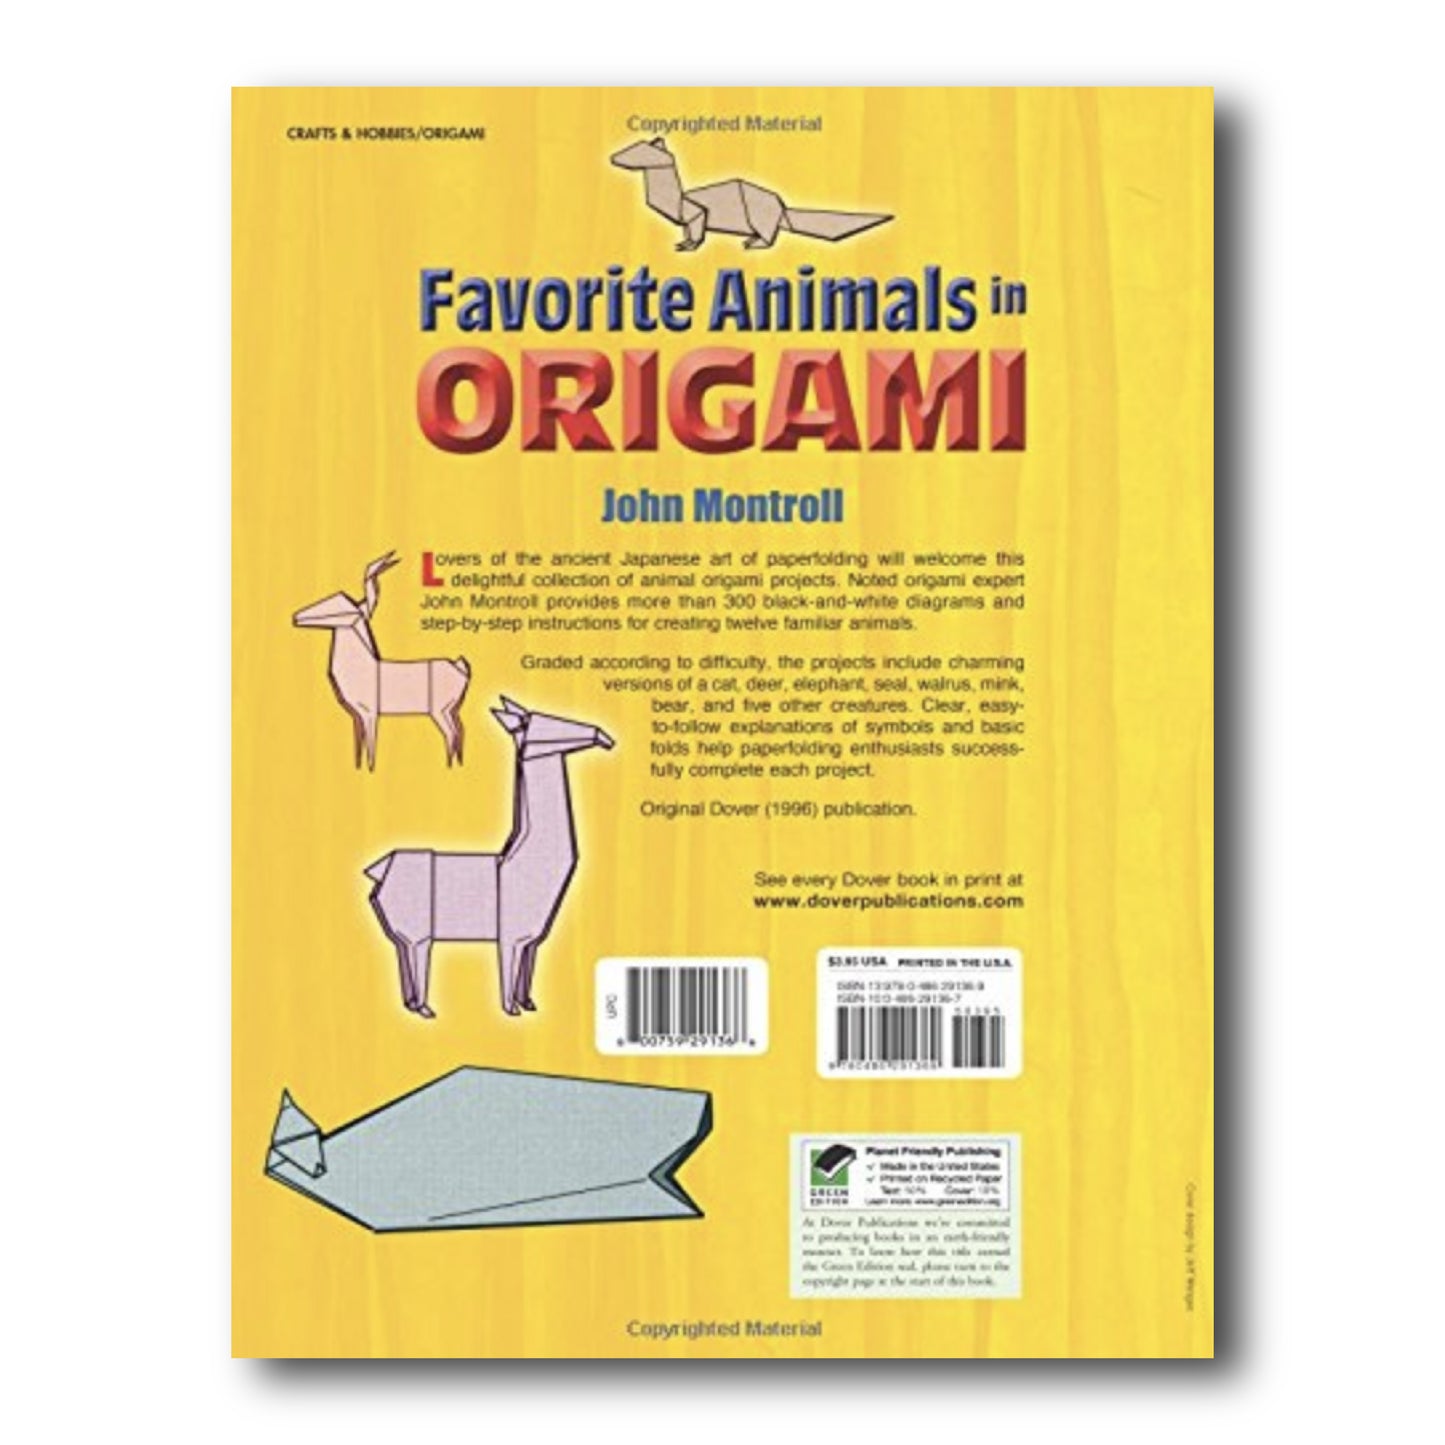 Favorite Animals in Origami: Step-By-Step Instructions for 12 Models